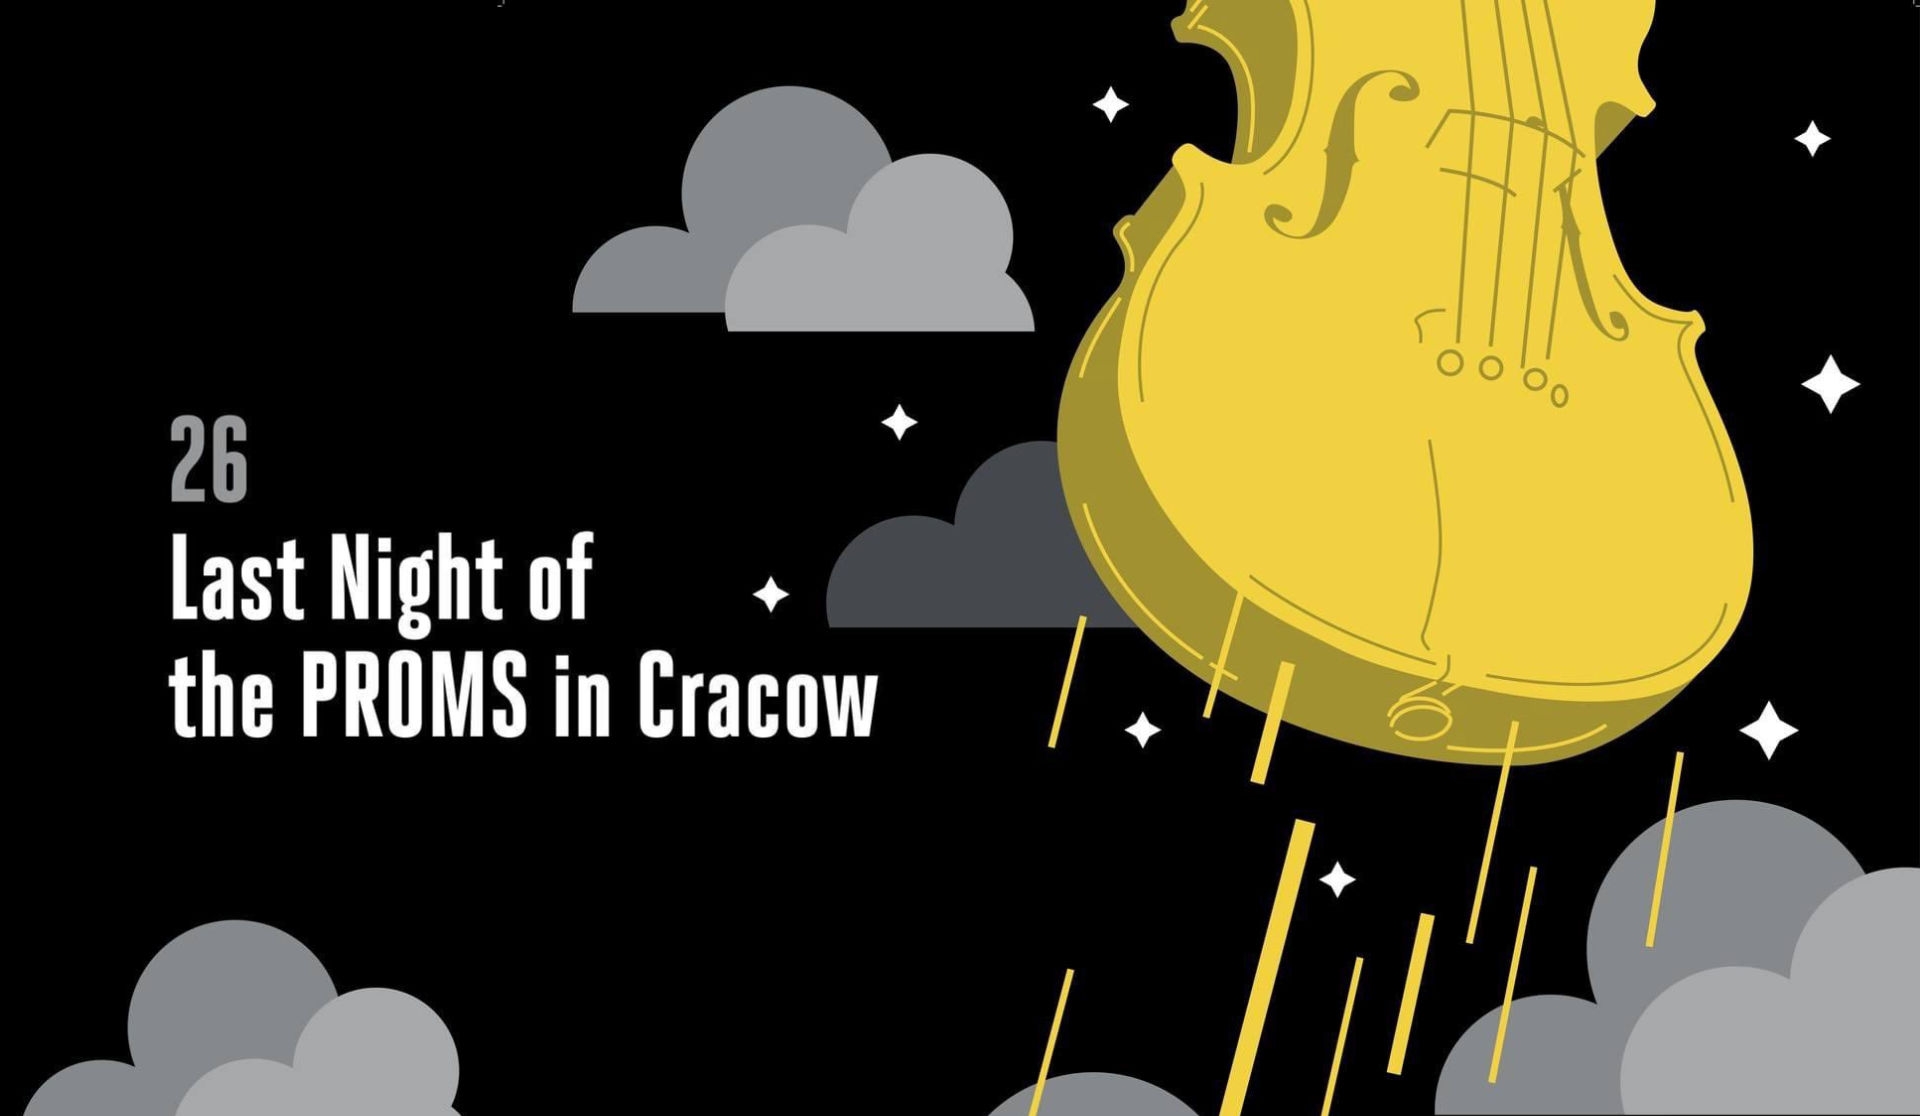 10.09.2021 – The last night of the Proms in Cracow